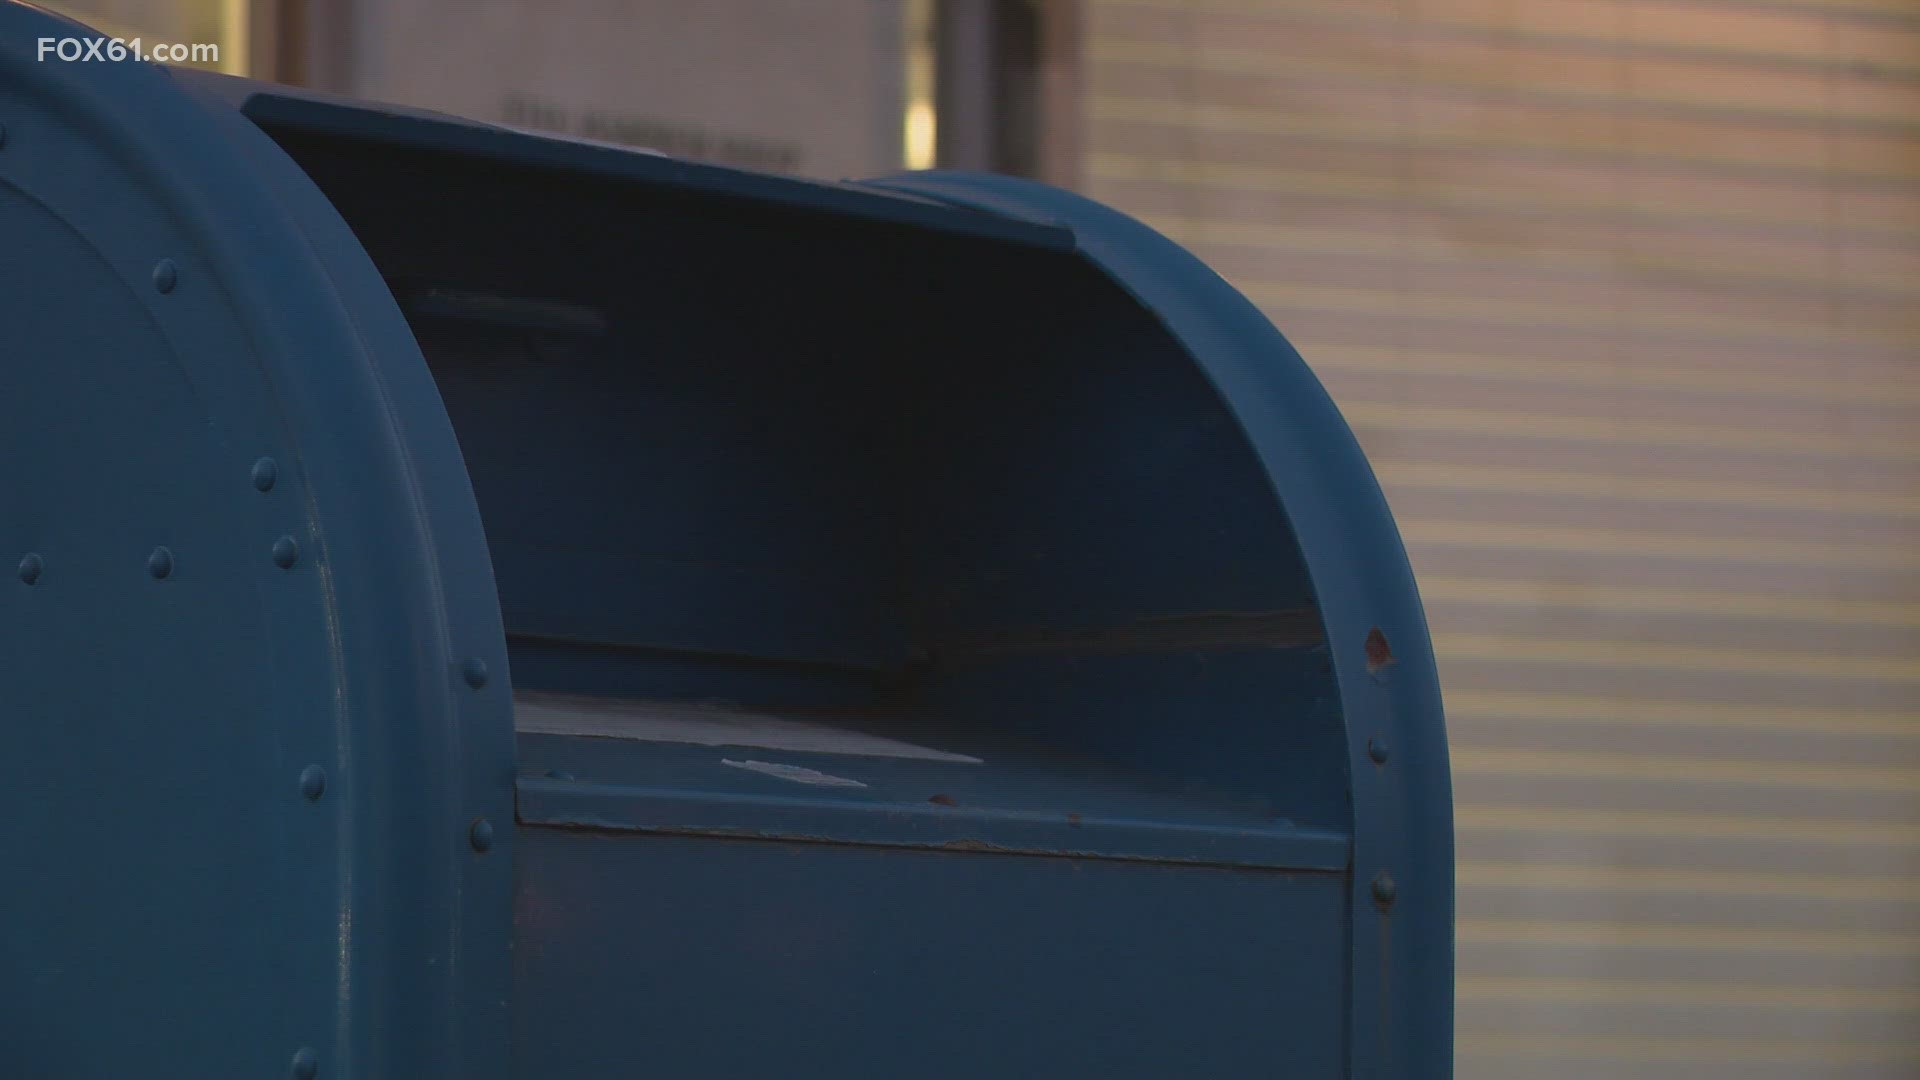 Watertown Police issued a warning after they noticed a spike in incidents where criminals have retrieved checks intended to be mailed.